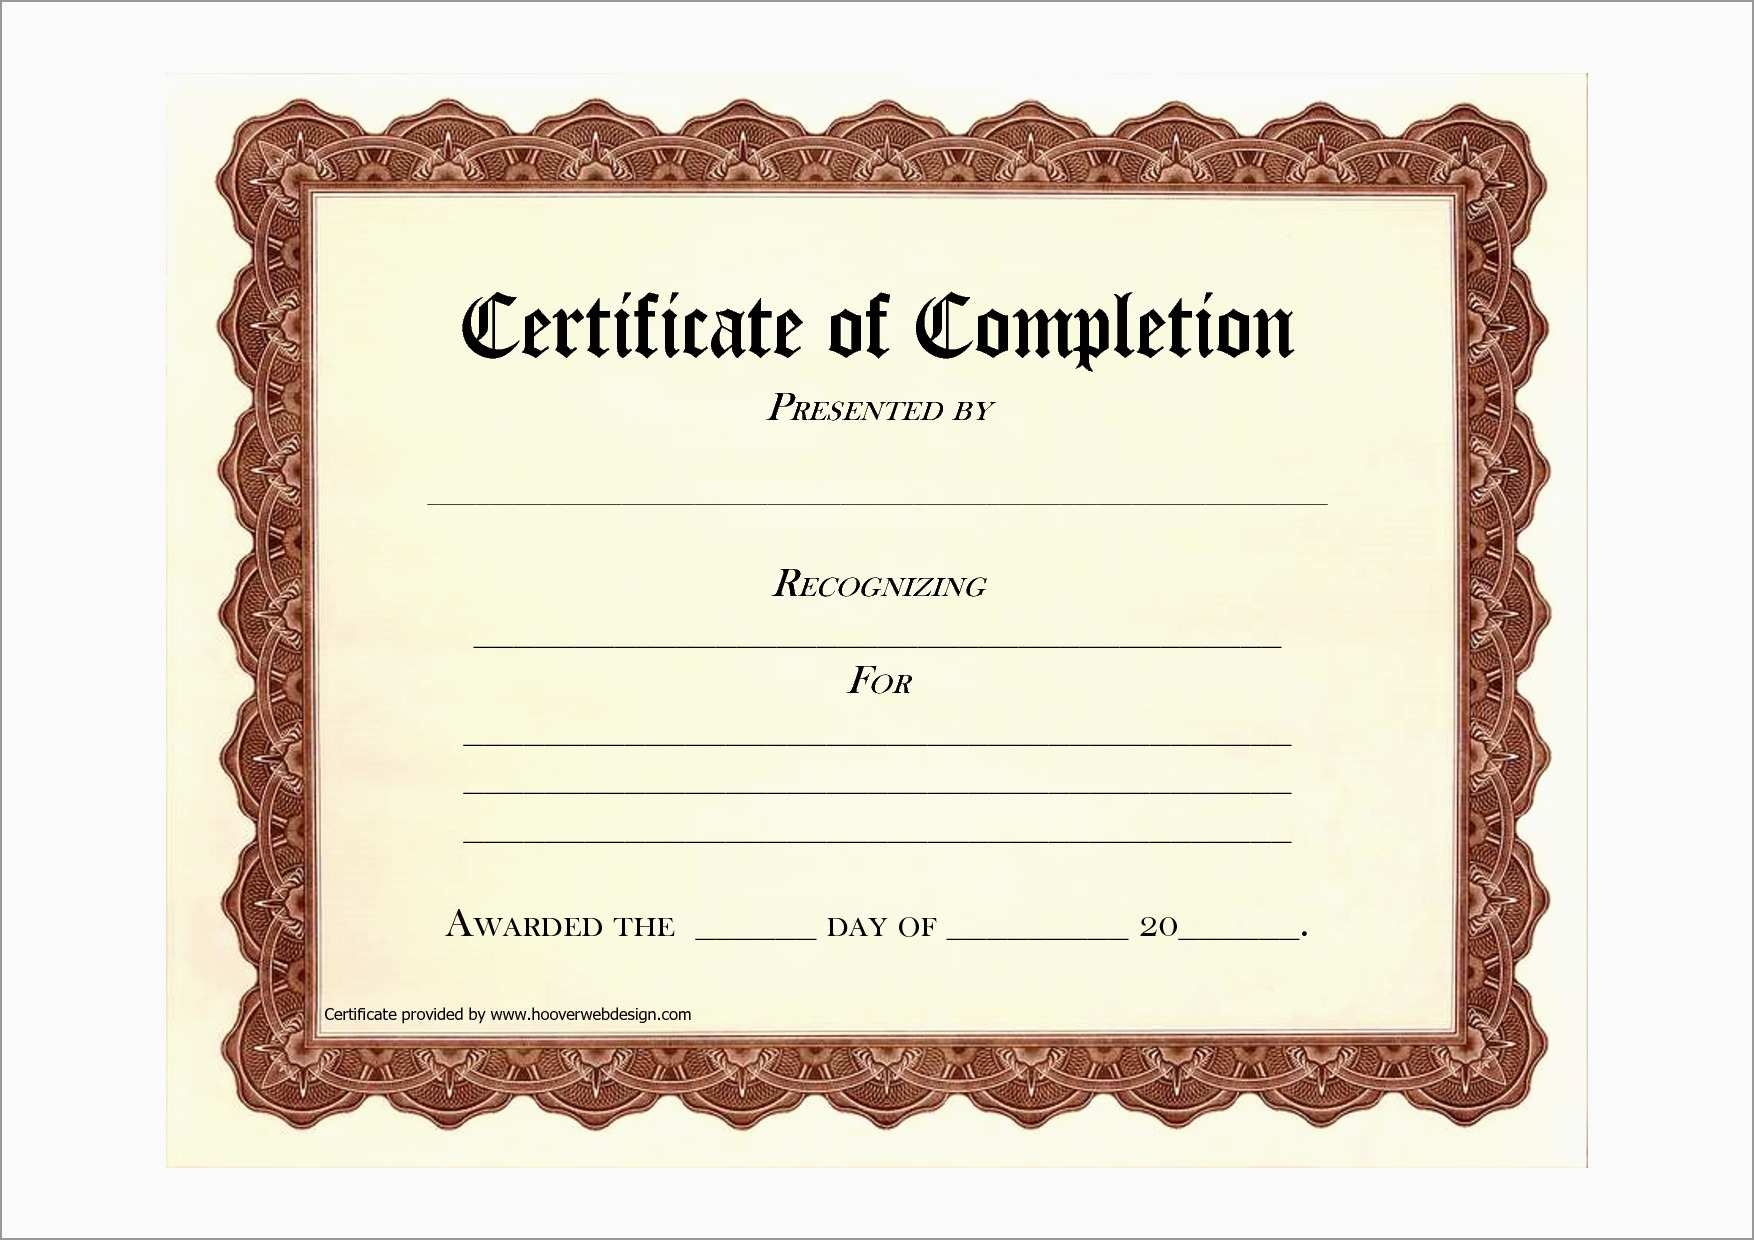 Unique Certificate Of Completion Template Free Download | Best Of - Certificate Of Completion Template Free Printable